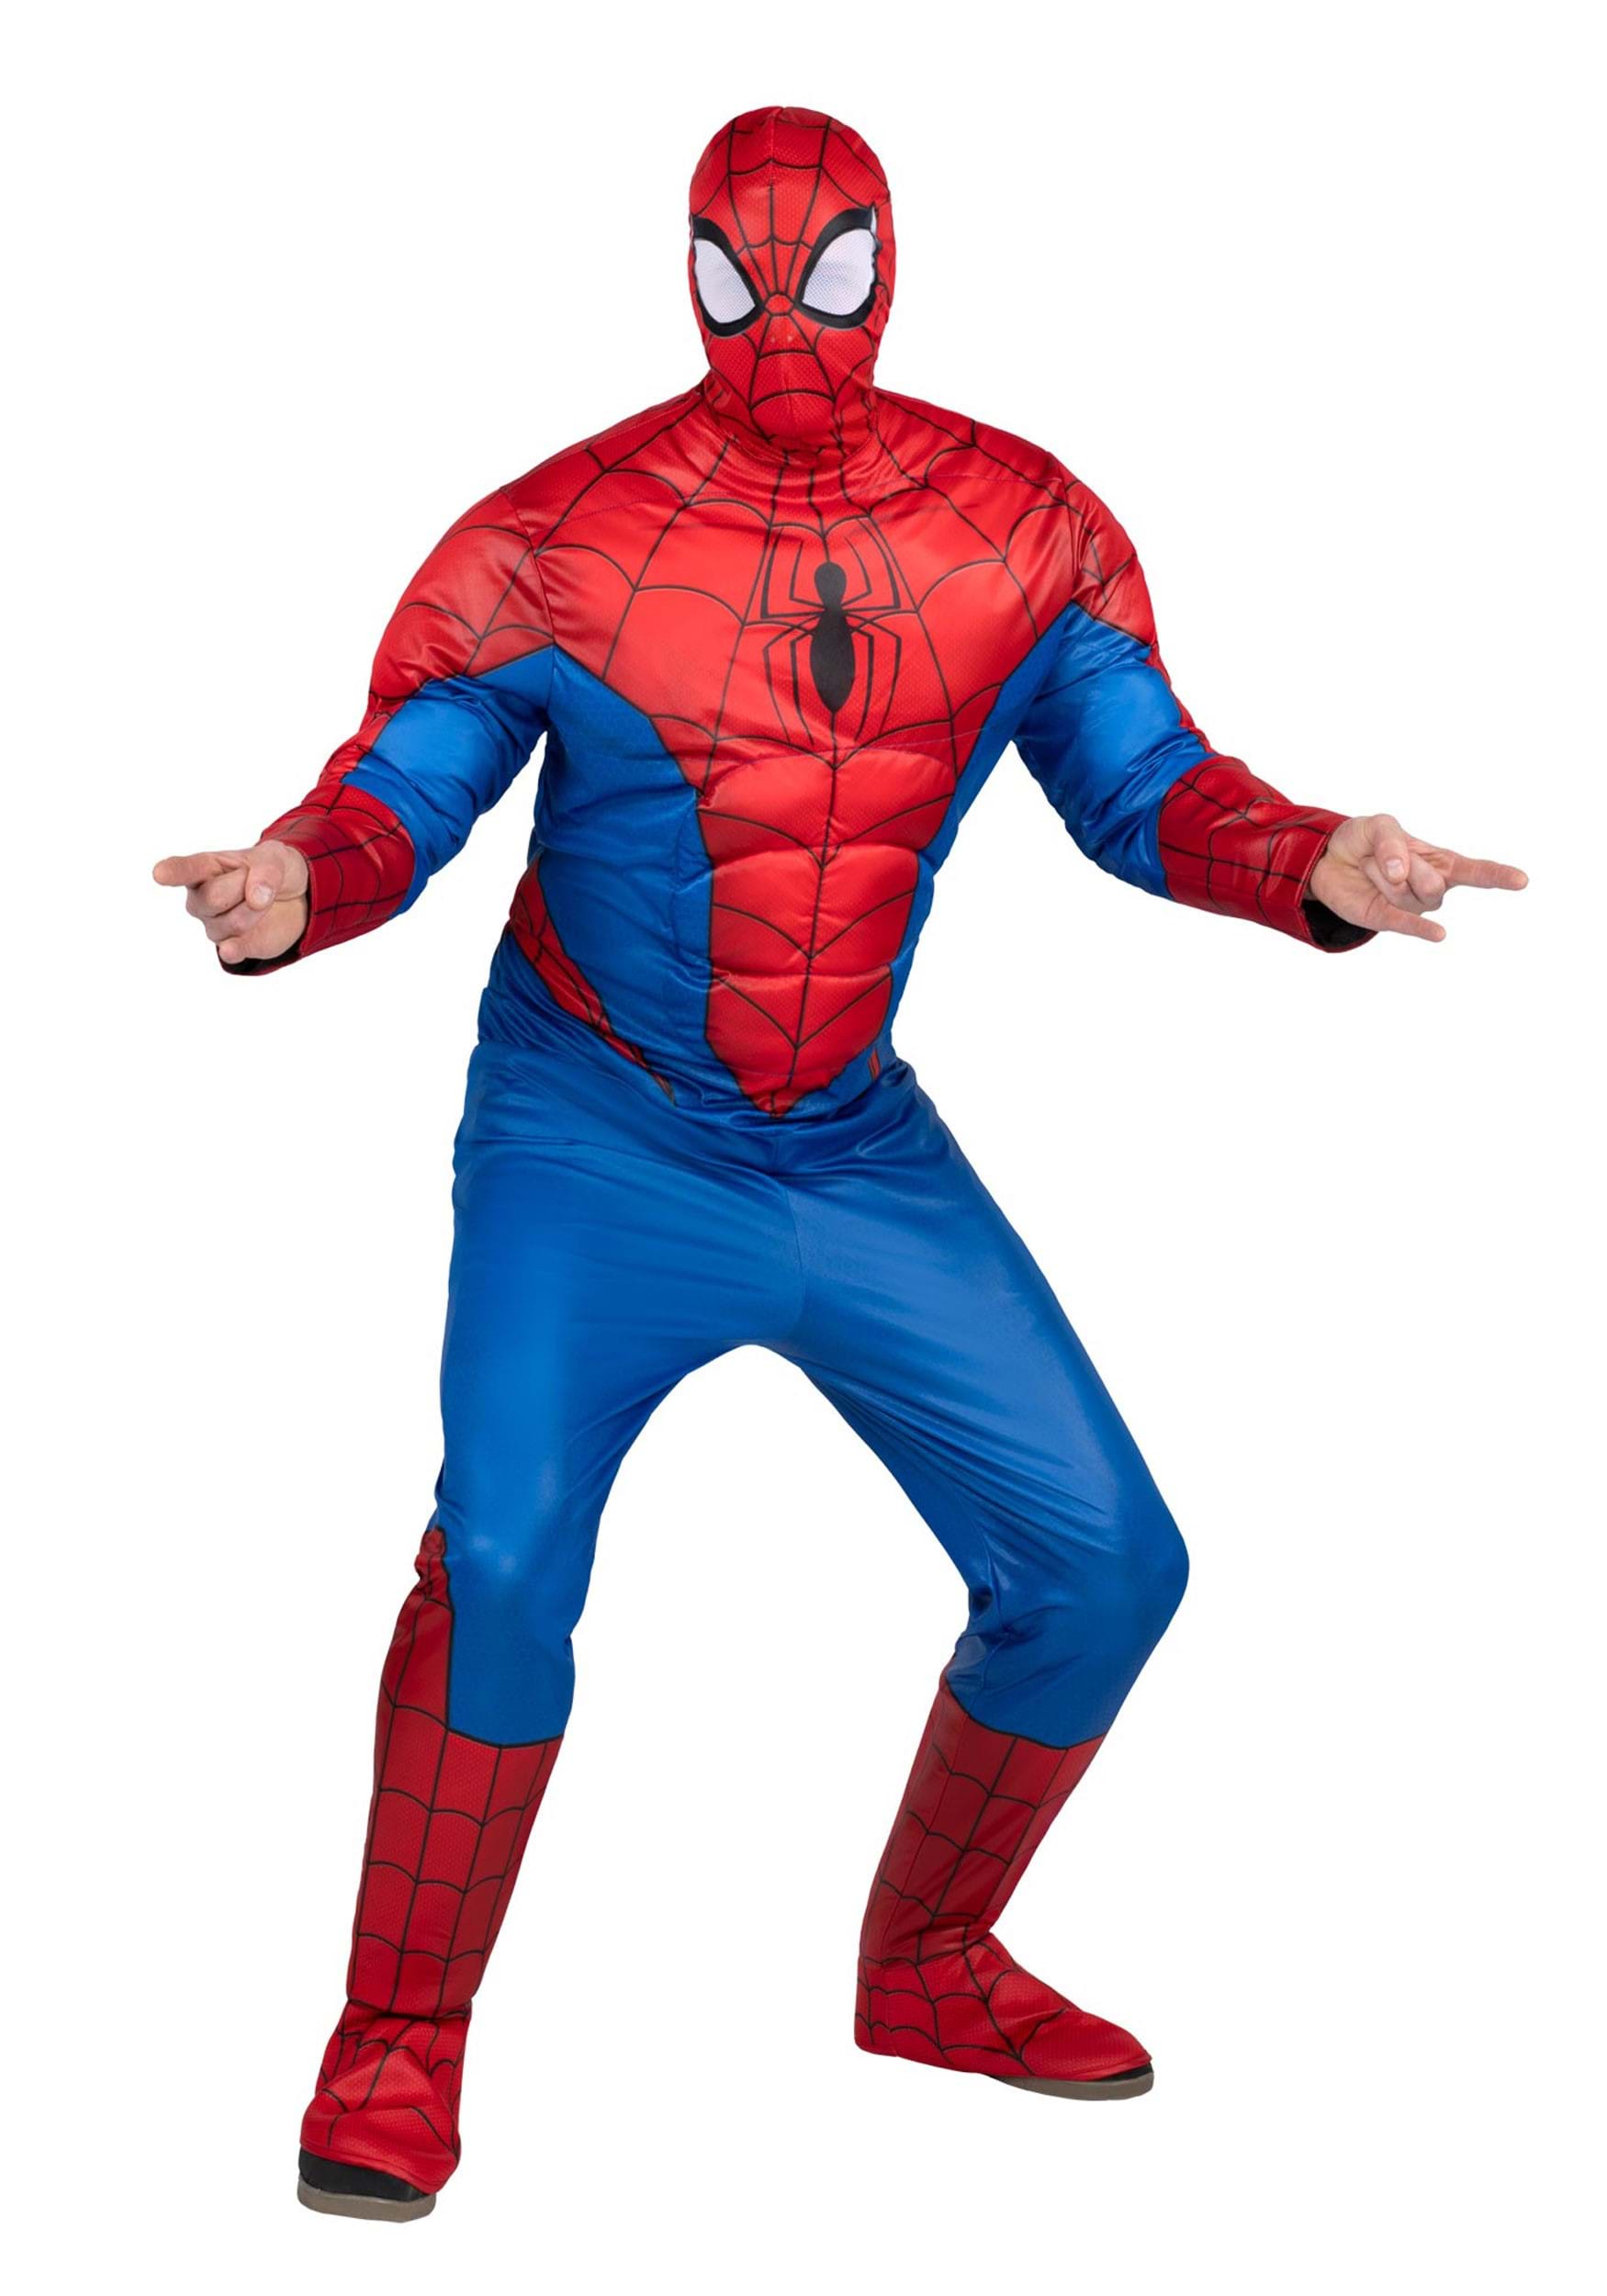 Spider-Man Fancy Dress Costume For Adults